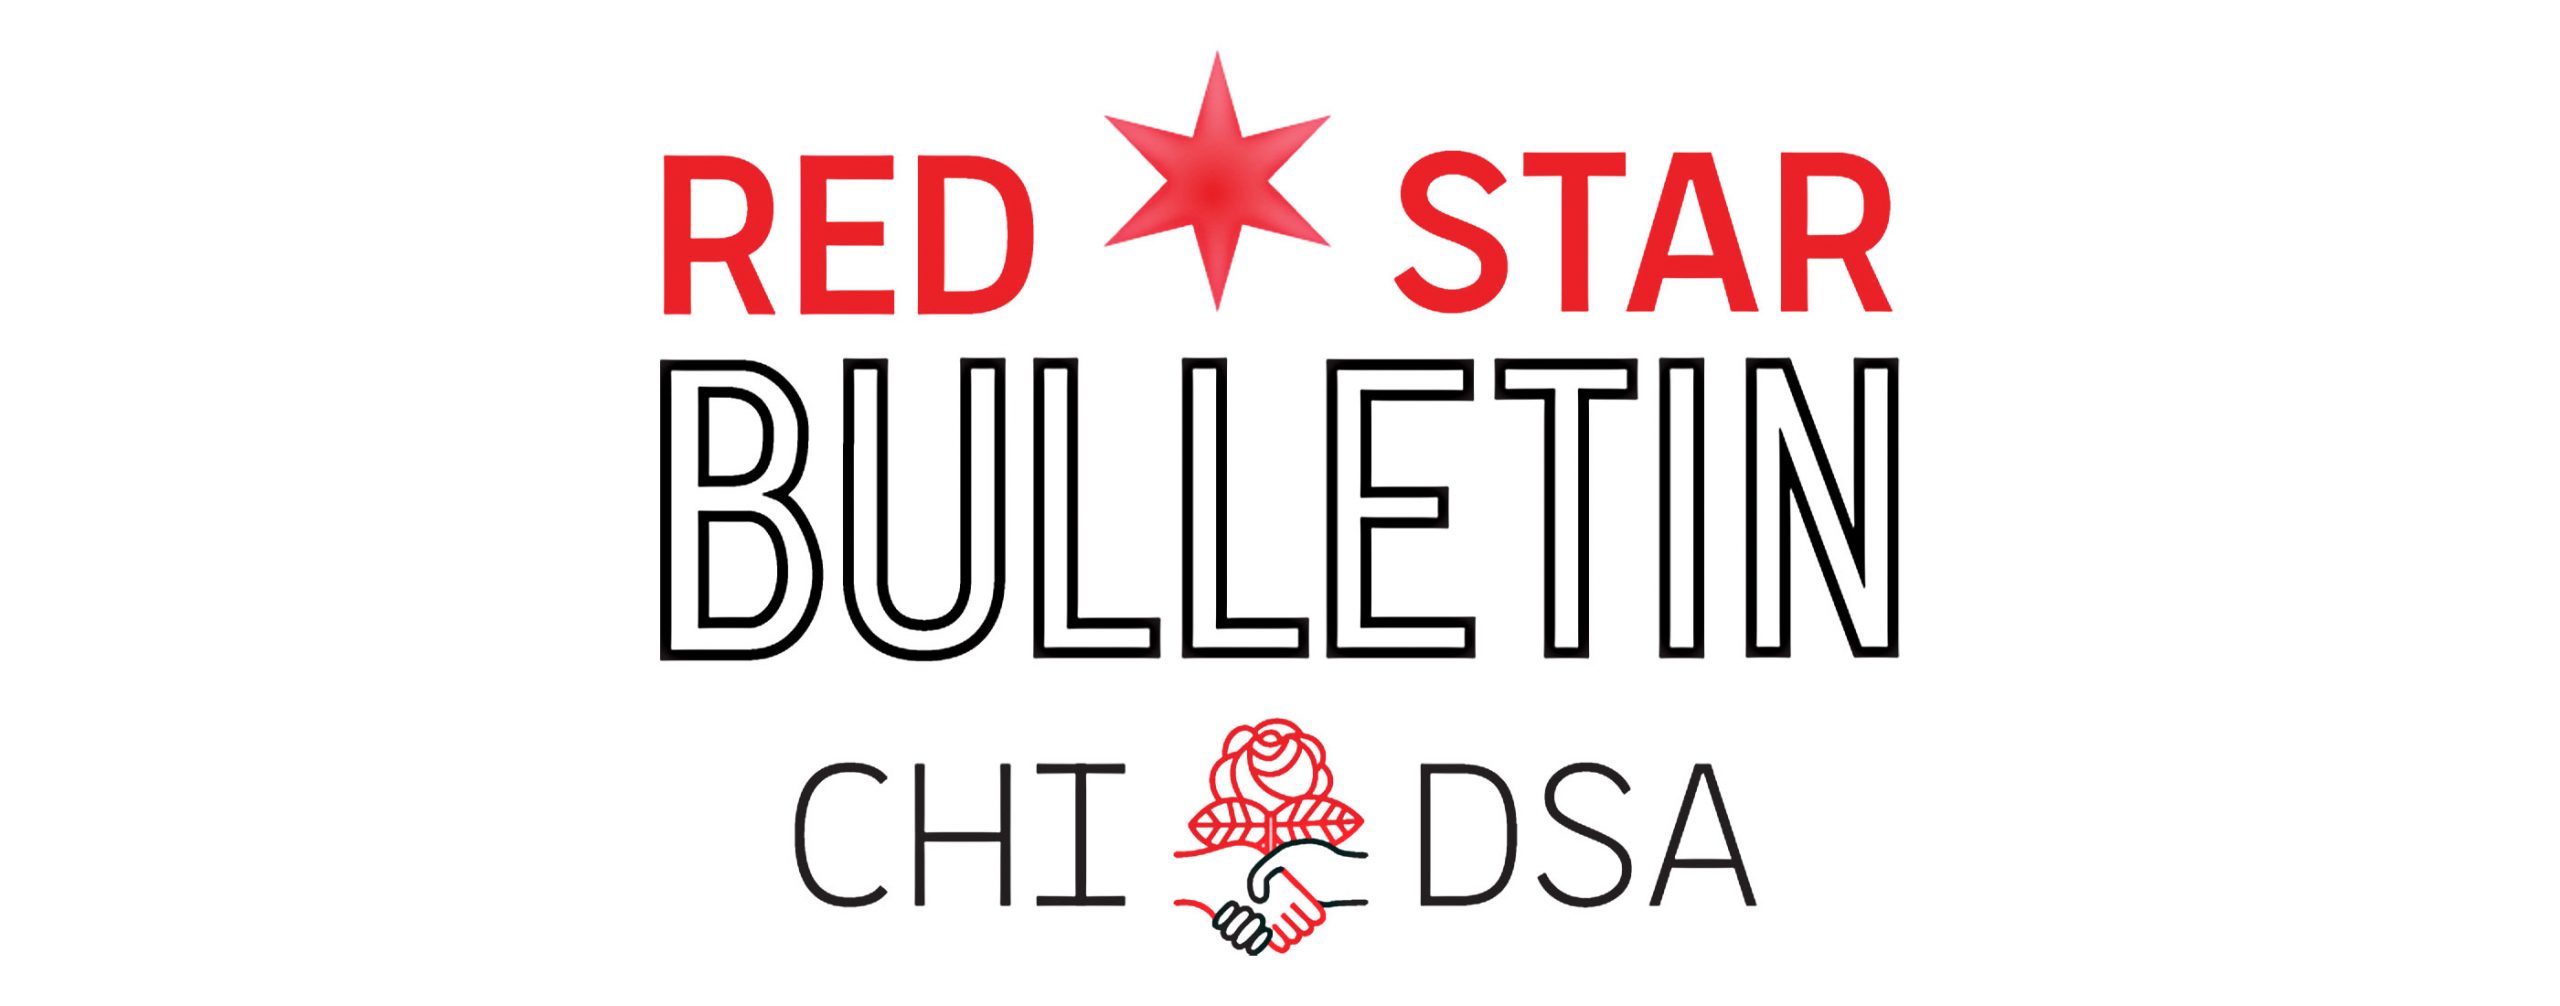 Red Star Bulletin Issue #19